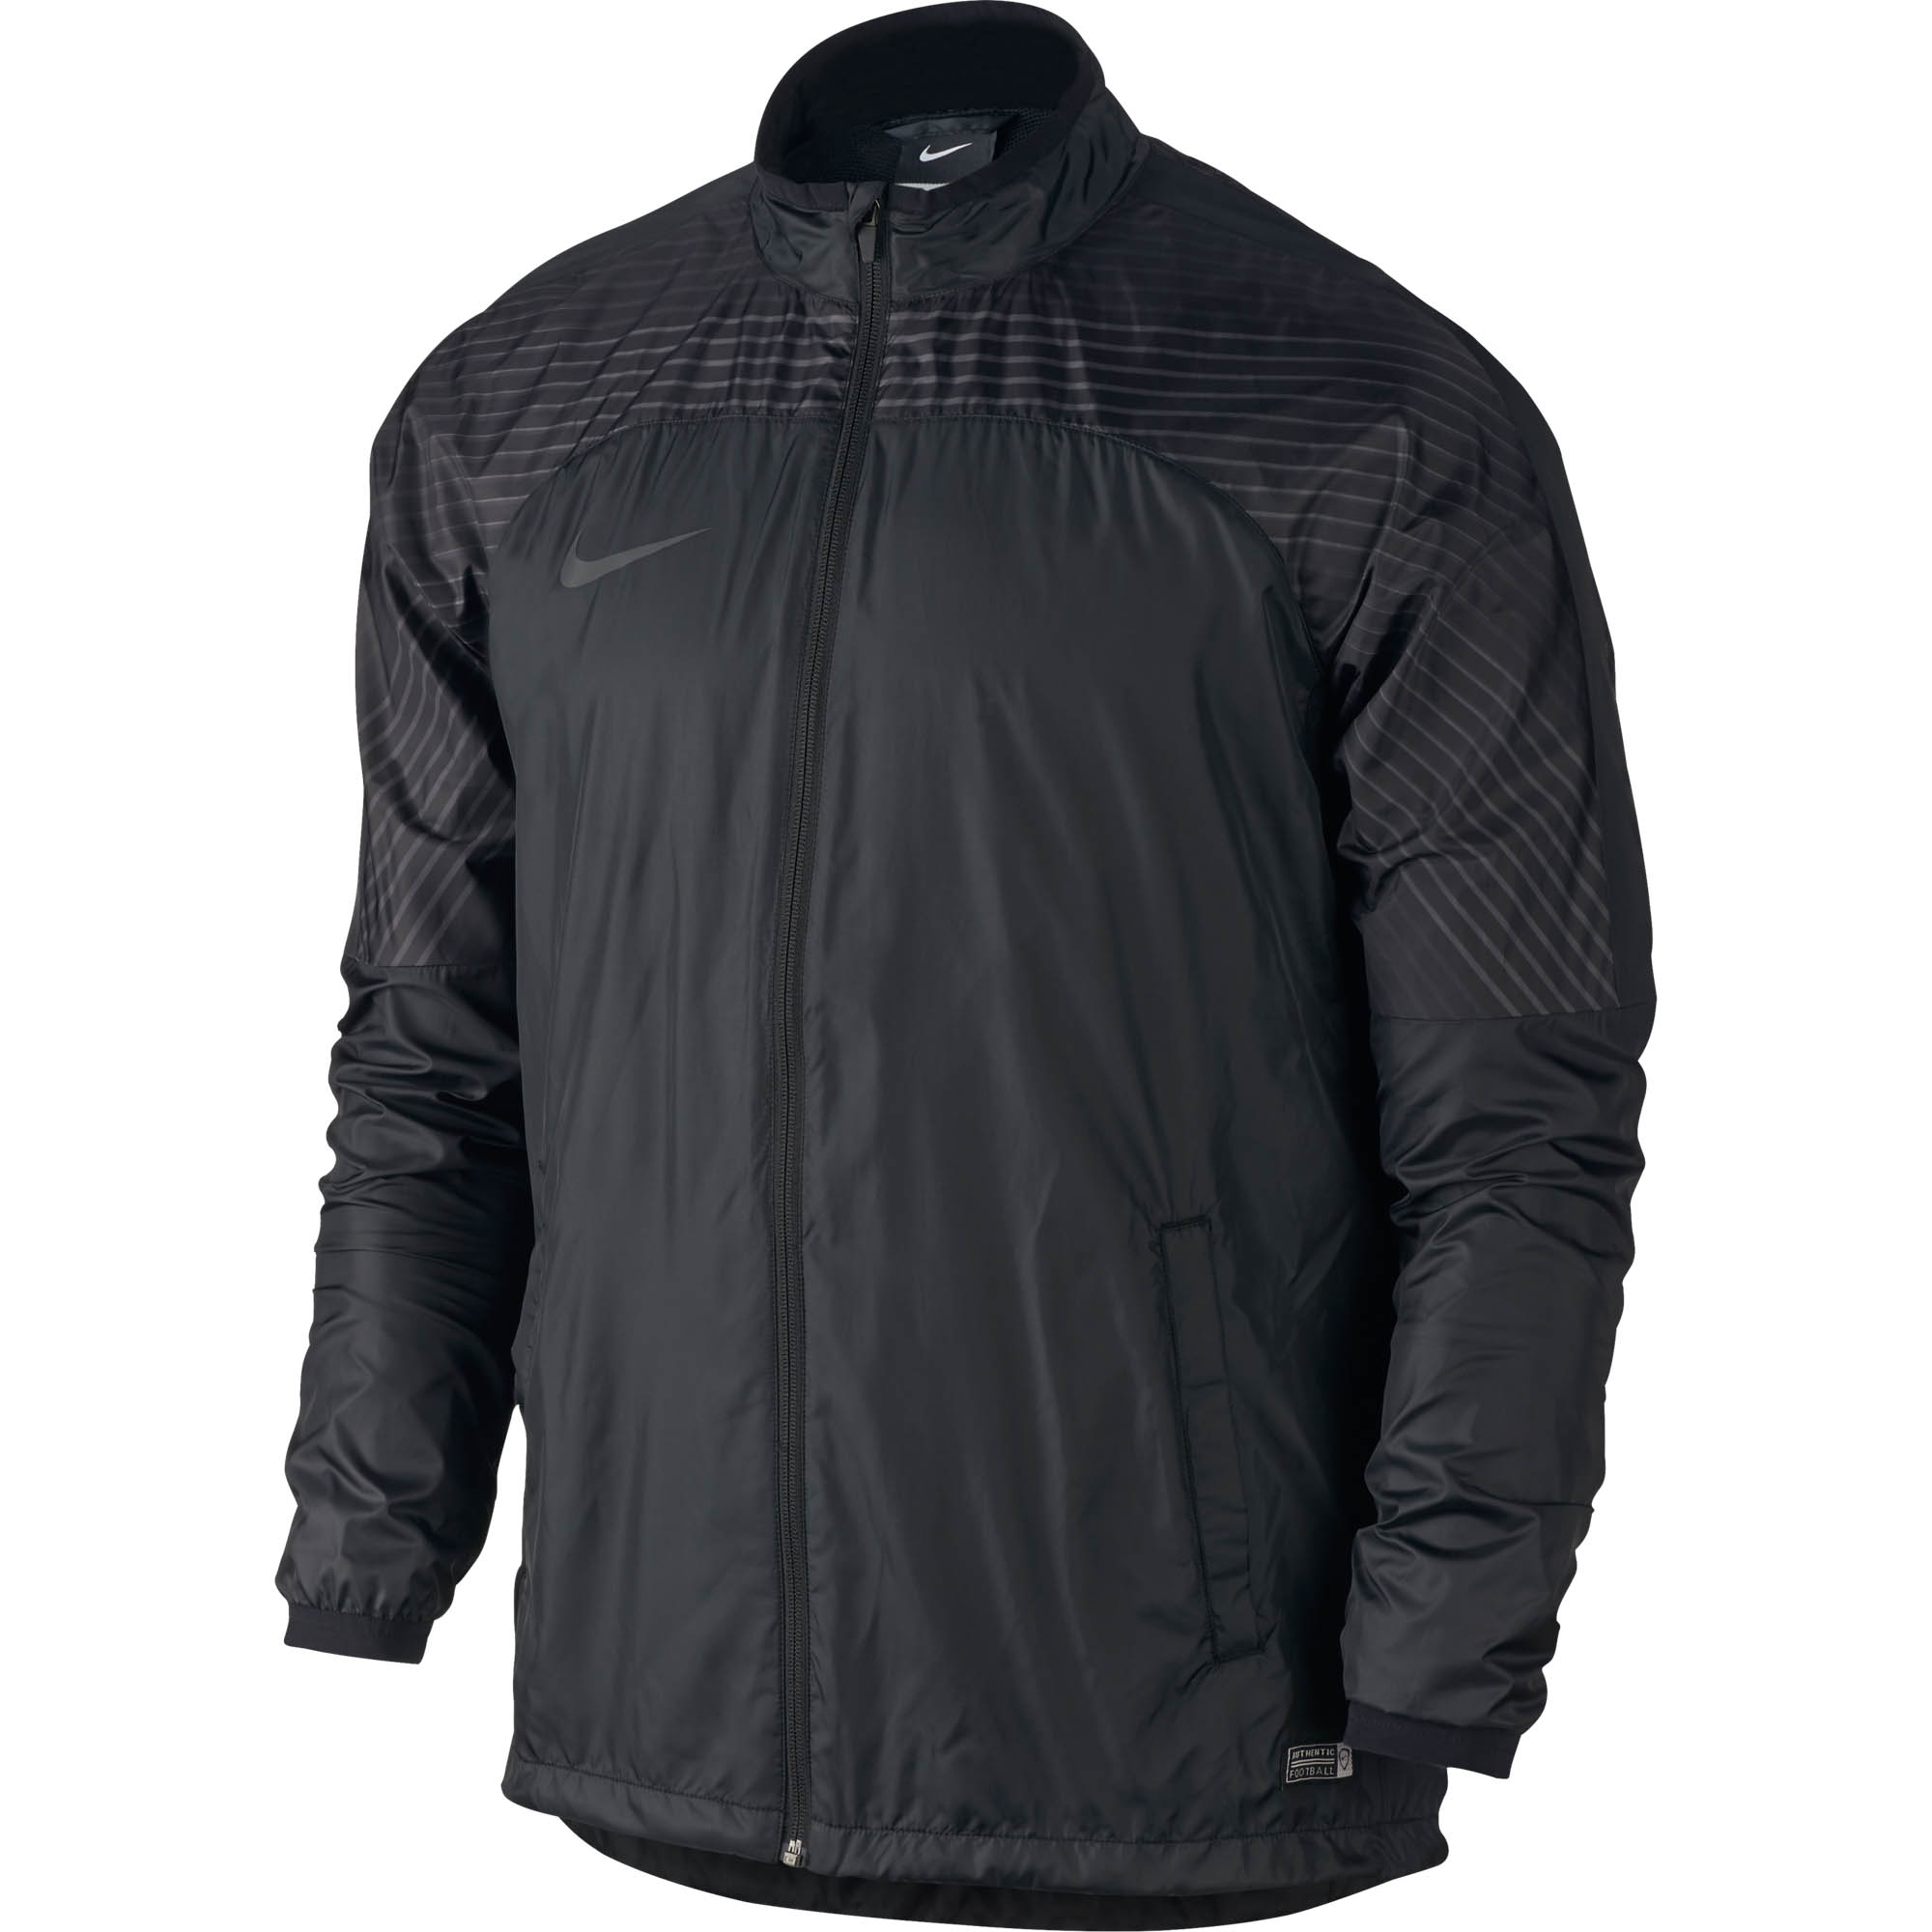 Admirable Marchito Por ley Nike Revolution GPX Woven Jacket II - Black/Anthracite - Soccer Master